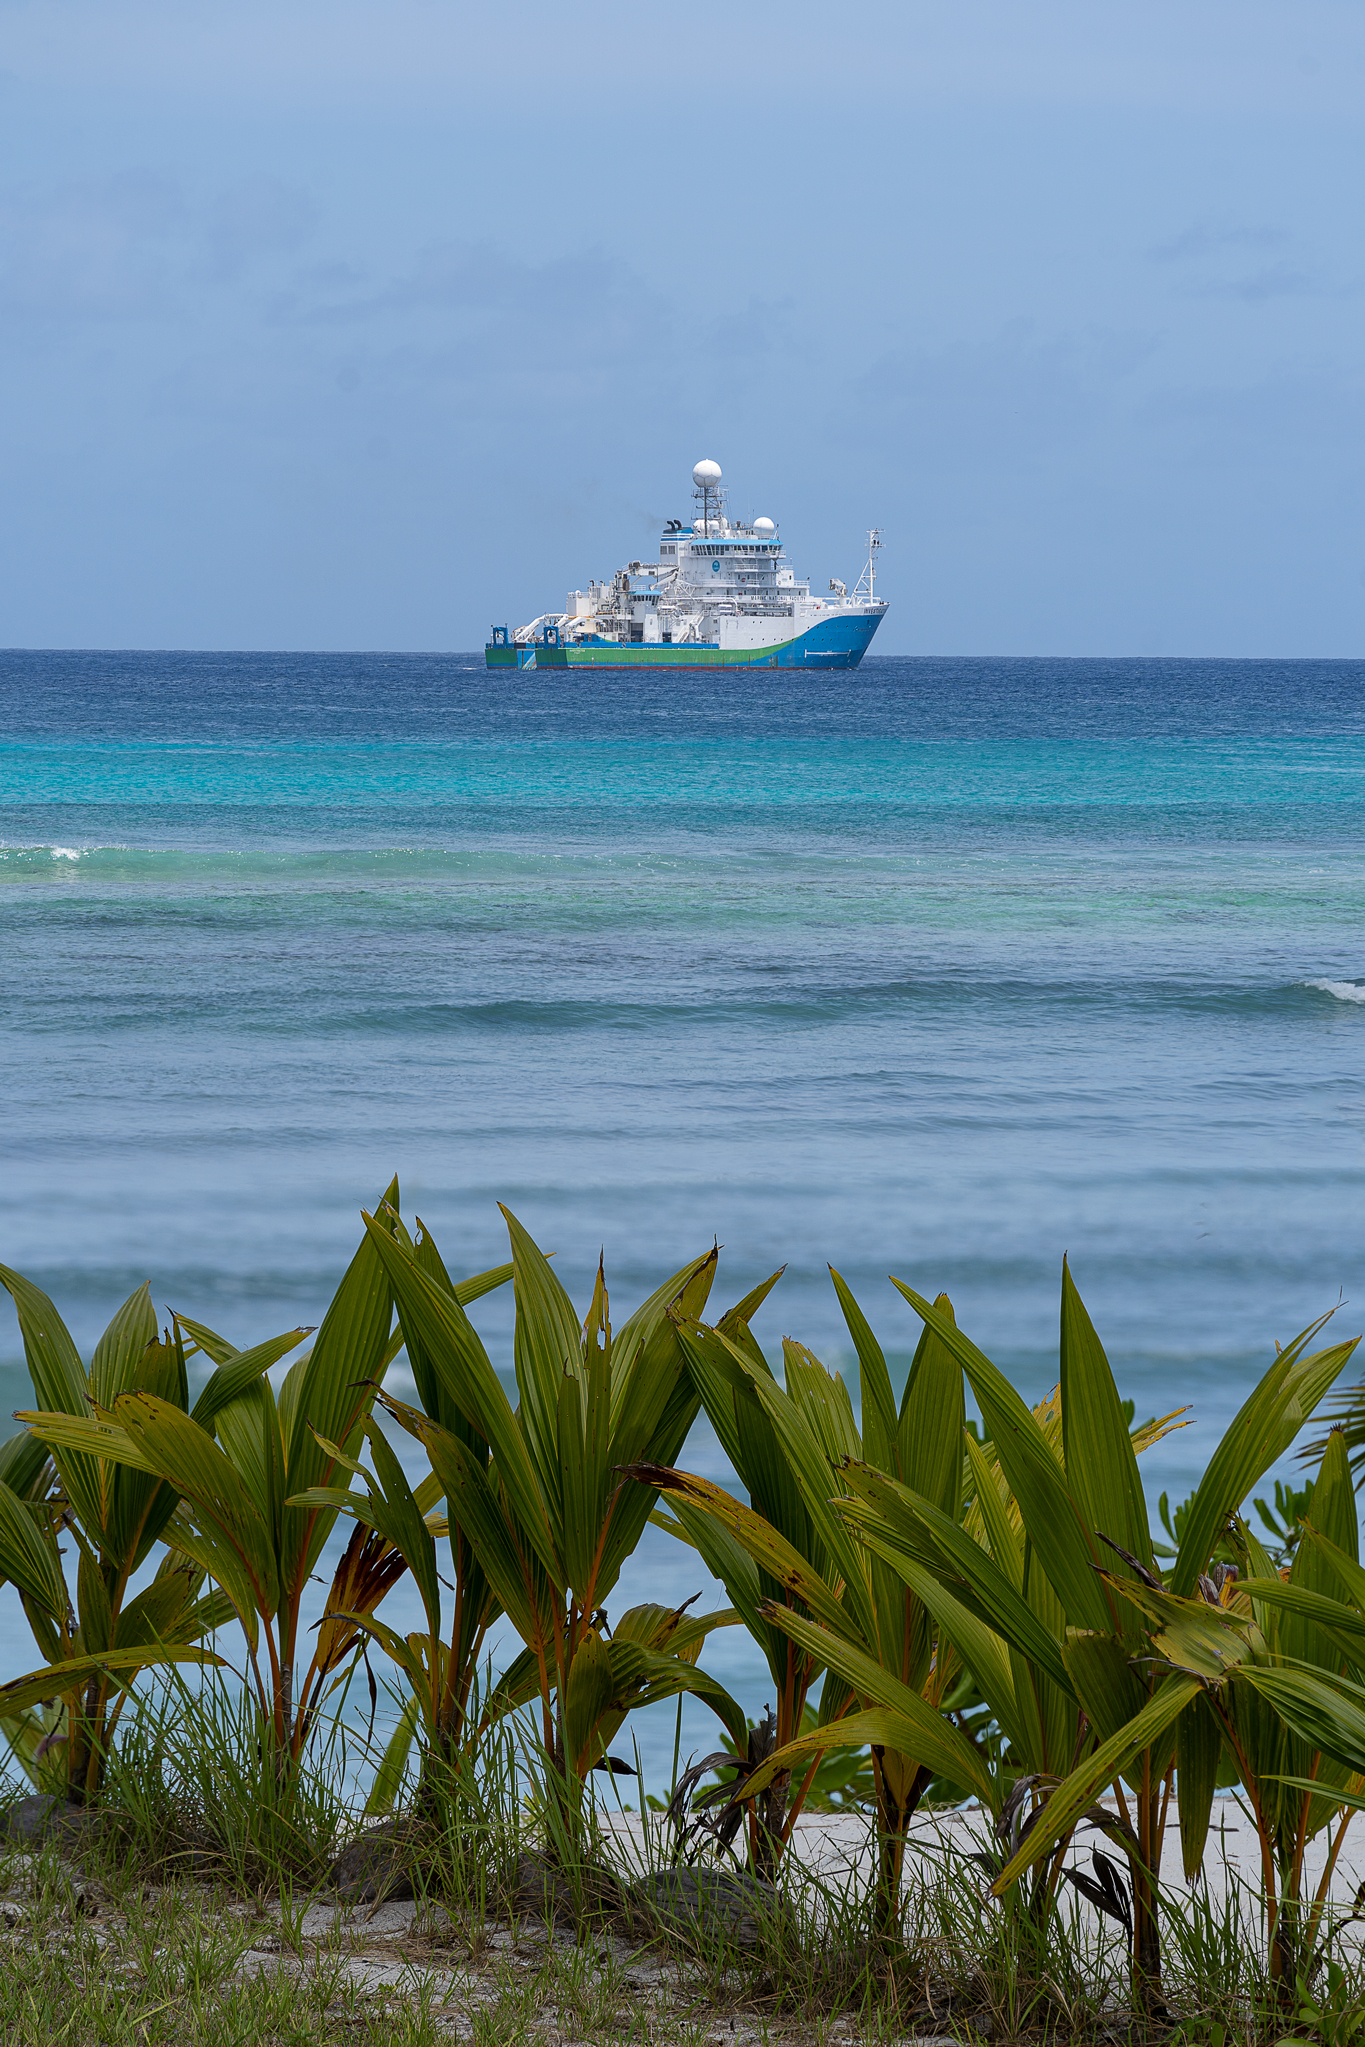 A ship viewed from a tropical island.